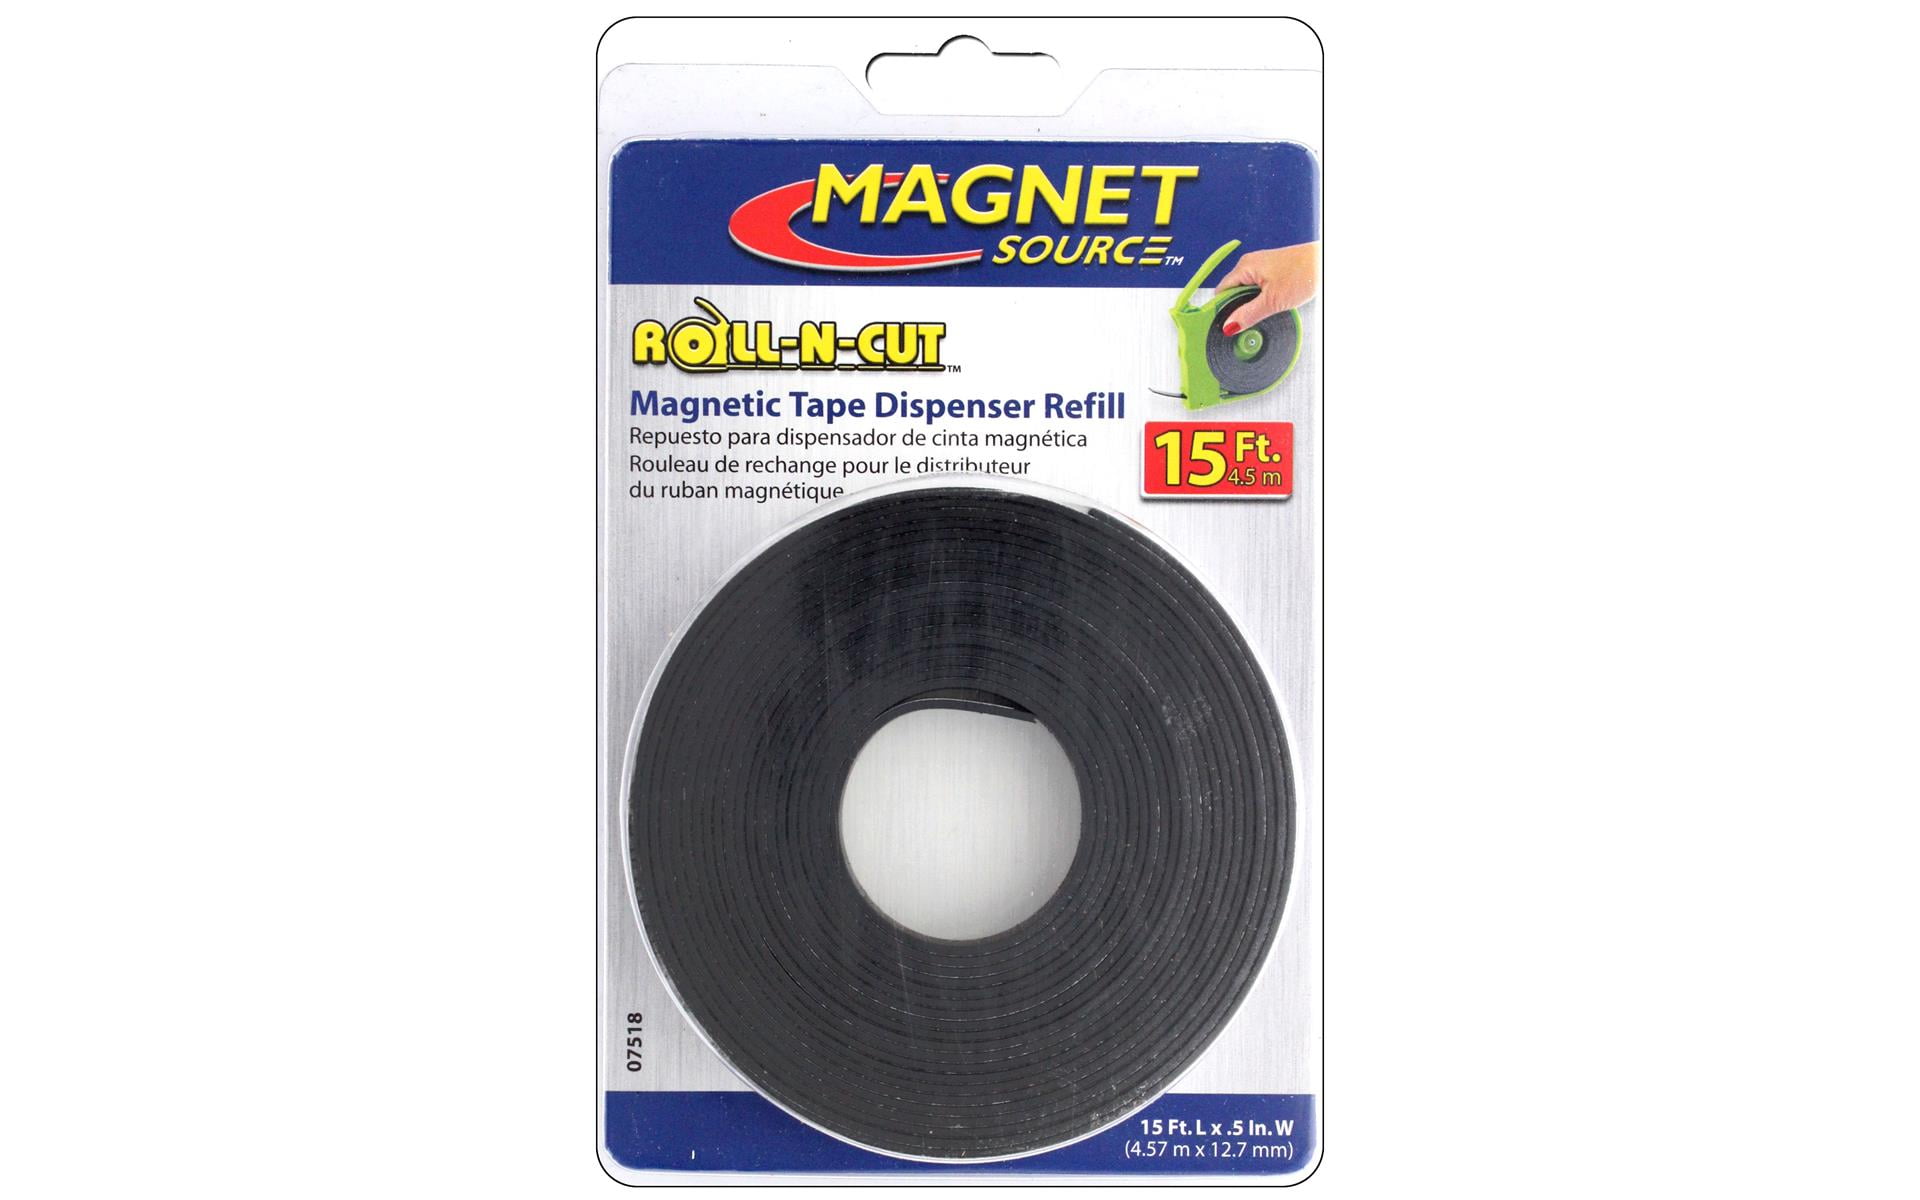 Master Magnetics ZGN40S3 Flexible Magnet Strip, Plain, No Laminate, 1/16  Thick, 1 Height, 100 Feet Scored Every 3, 1 Roll with 396-1 x 3 Pieces